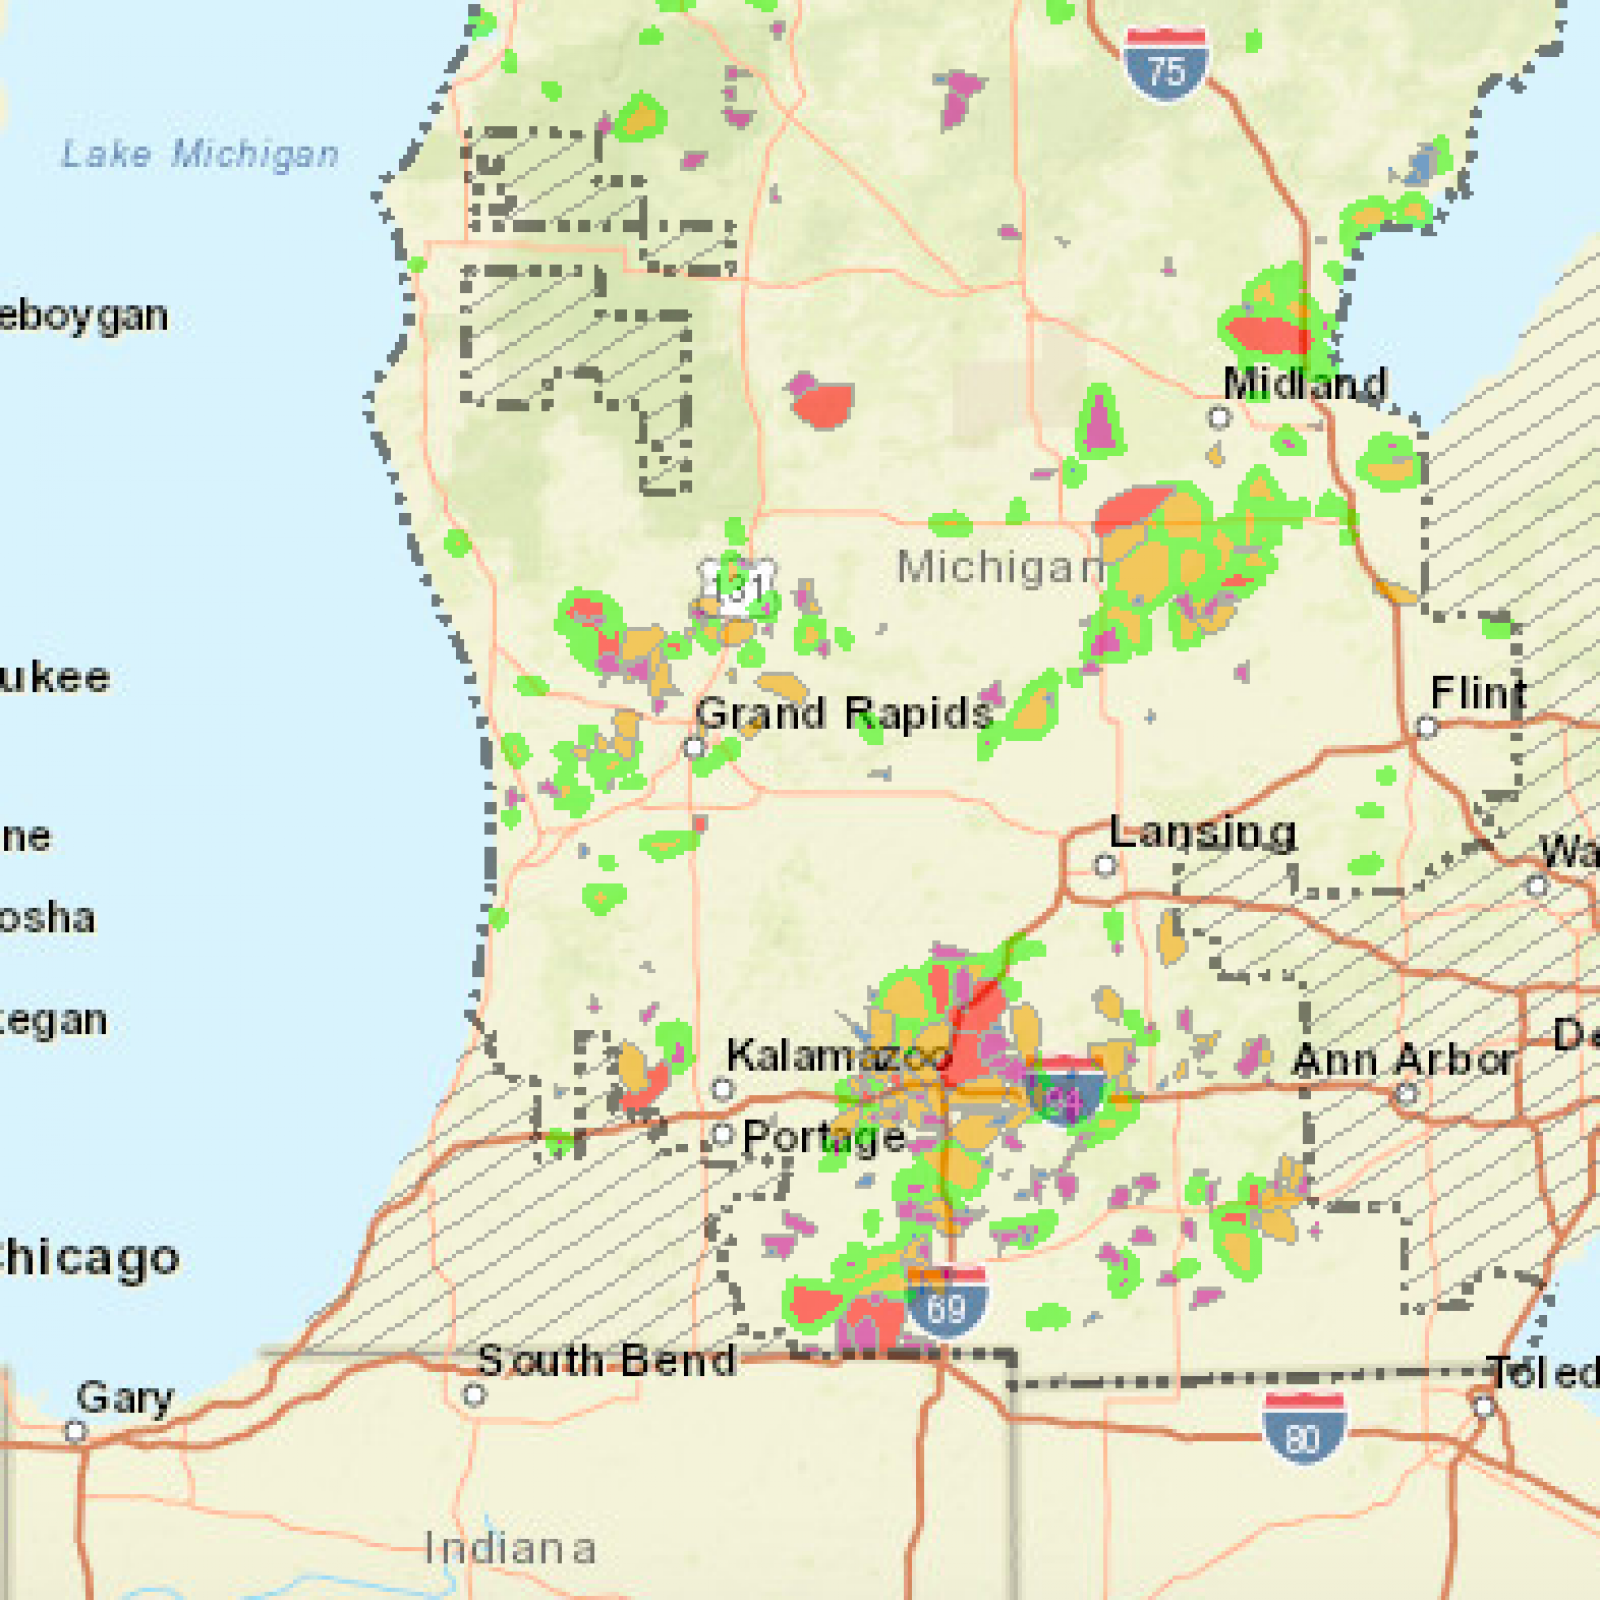 https://d.newsweek.com/en/full/1598847/consumers-energy-power-outage-map-michigan.png?w=1600&h=1600&q=88&f=ee584d12256e5c3fa43bbfe005bbb0e7